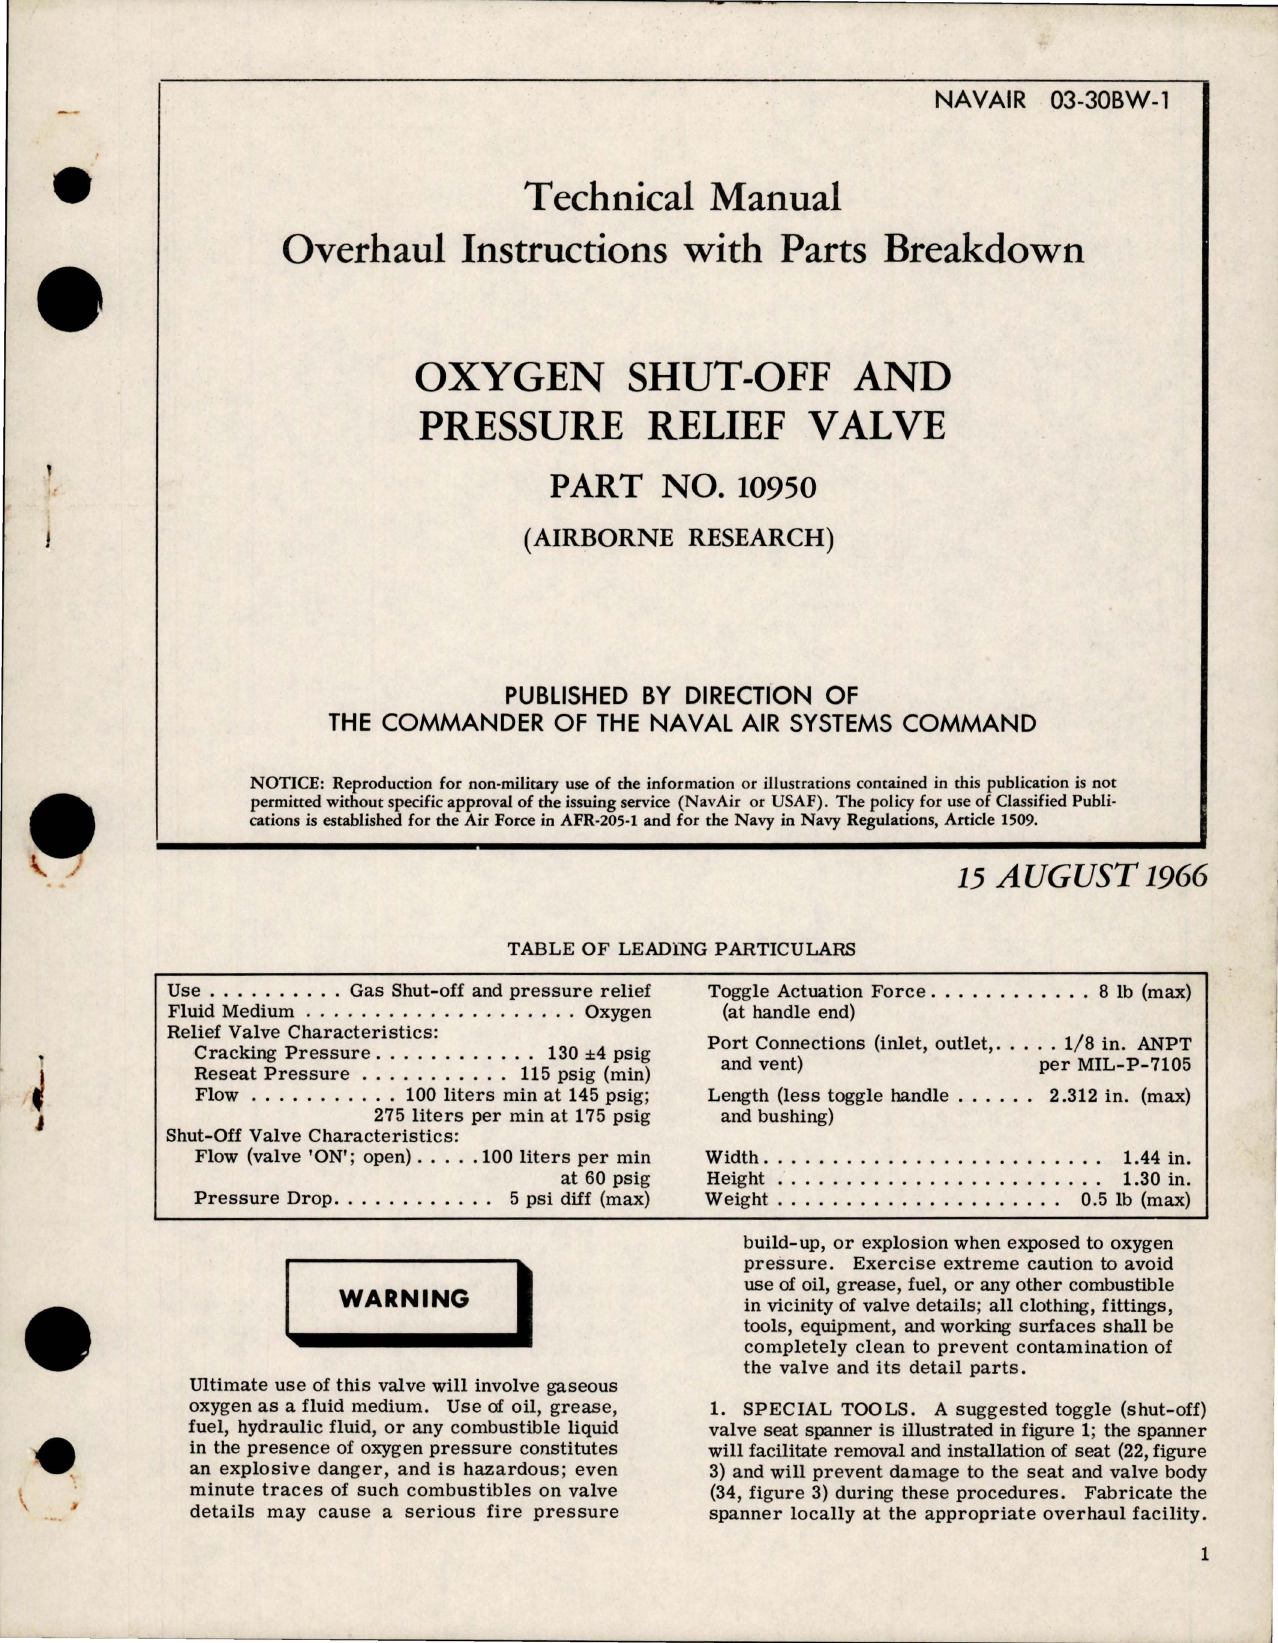 Sample page 1 from AirCorps Library document: Overhaul Instructions with Parts for Oxygen Shut-Off and Pressure Relief Valve - Part 10950 